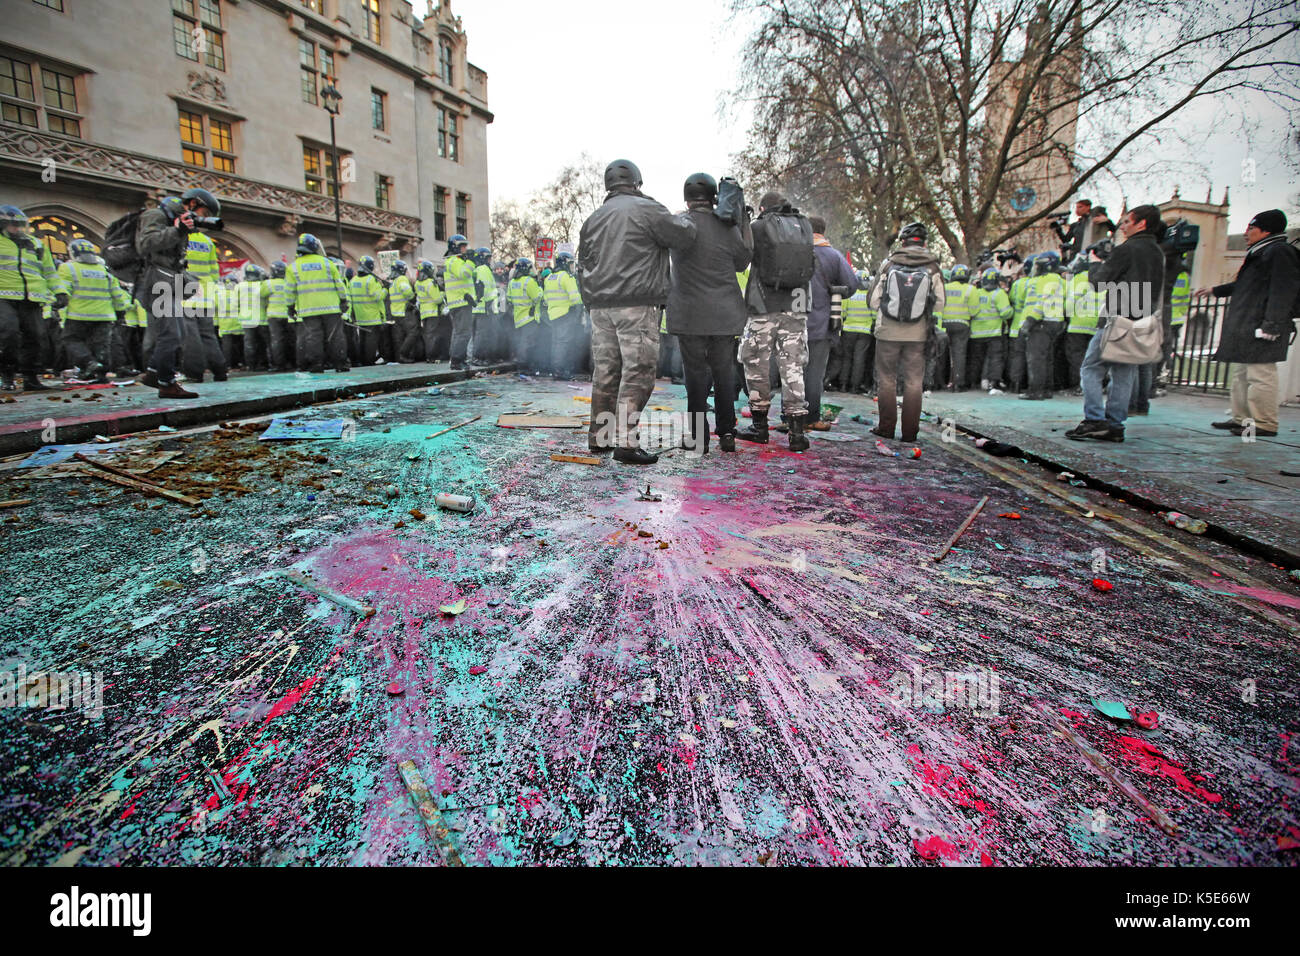 Paint bomb missles. Mass student protests and civil unrest in London against increases in university tuition fees. Stock Photo